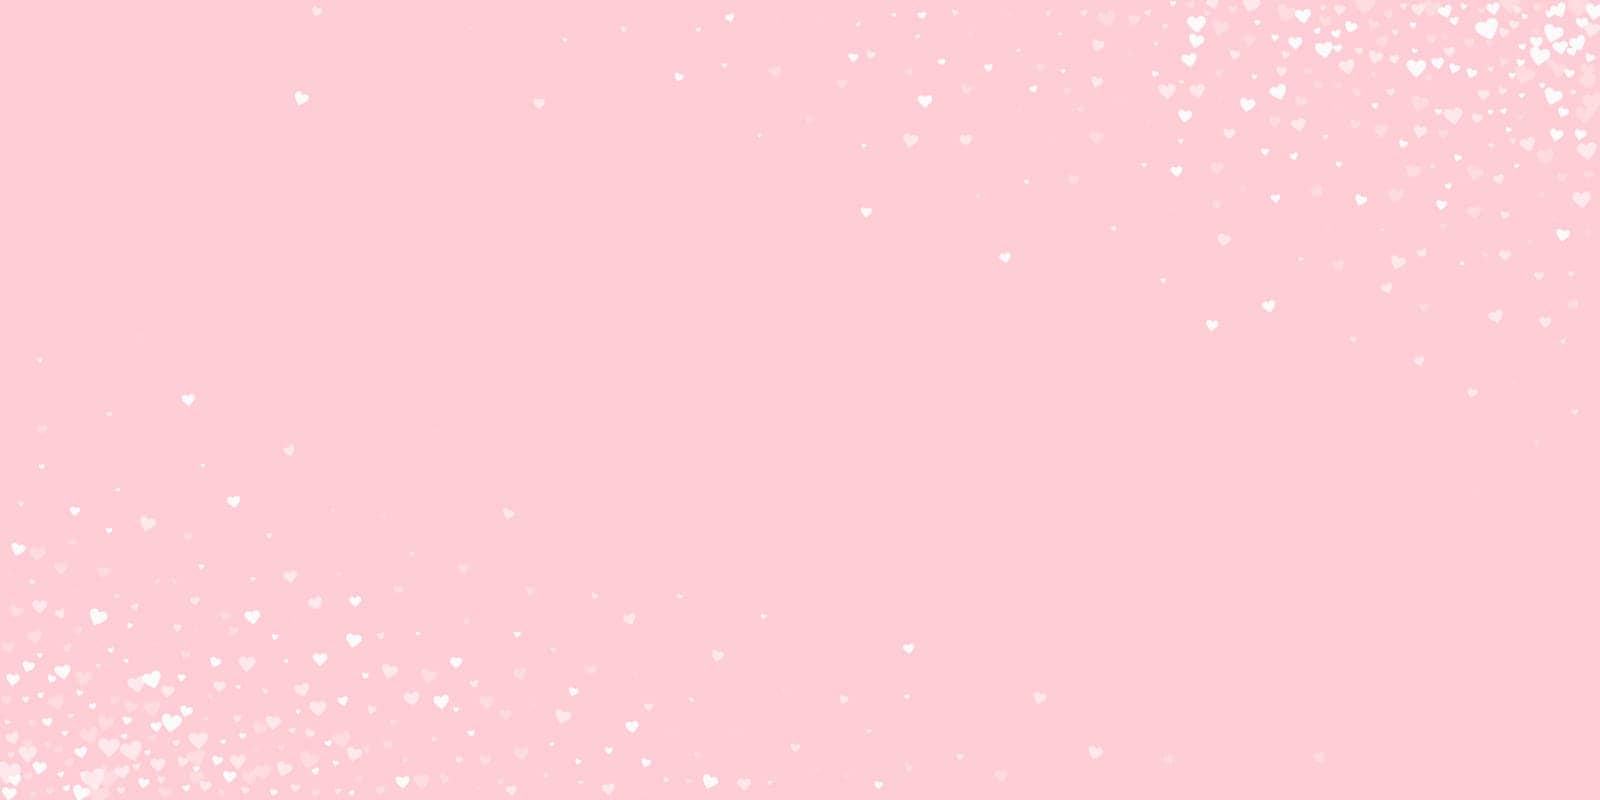 White hearts scattered on pink background. by beginagain